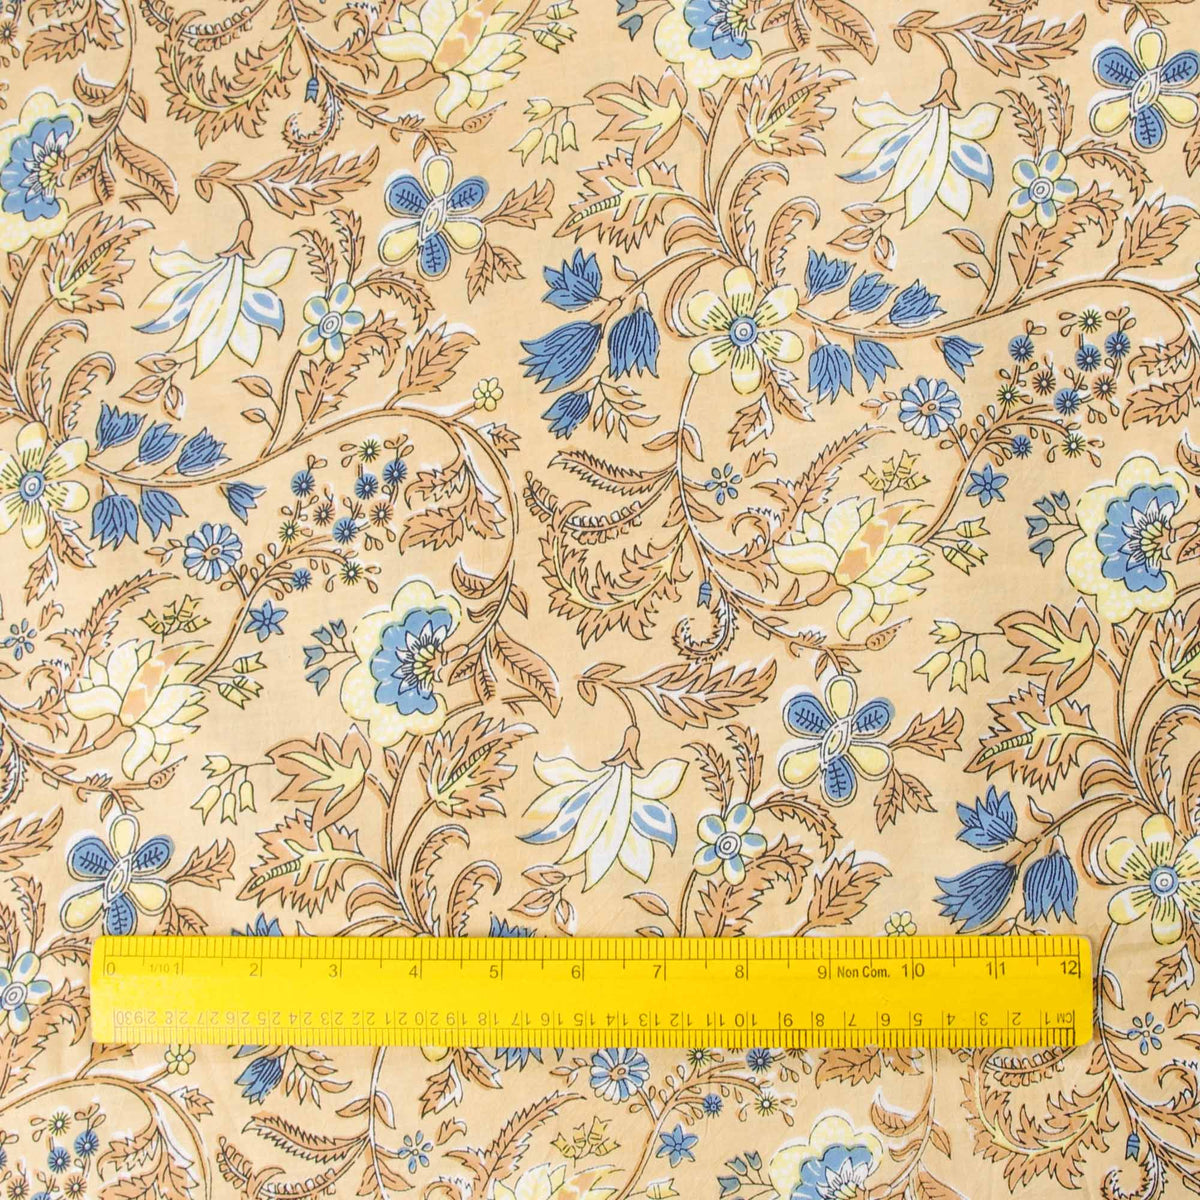 Hand Screen Printed 100% Cotton Fabric - Beige & Blue Floral Jaal (Design 372)